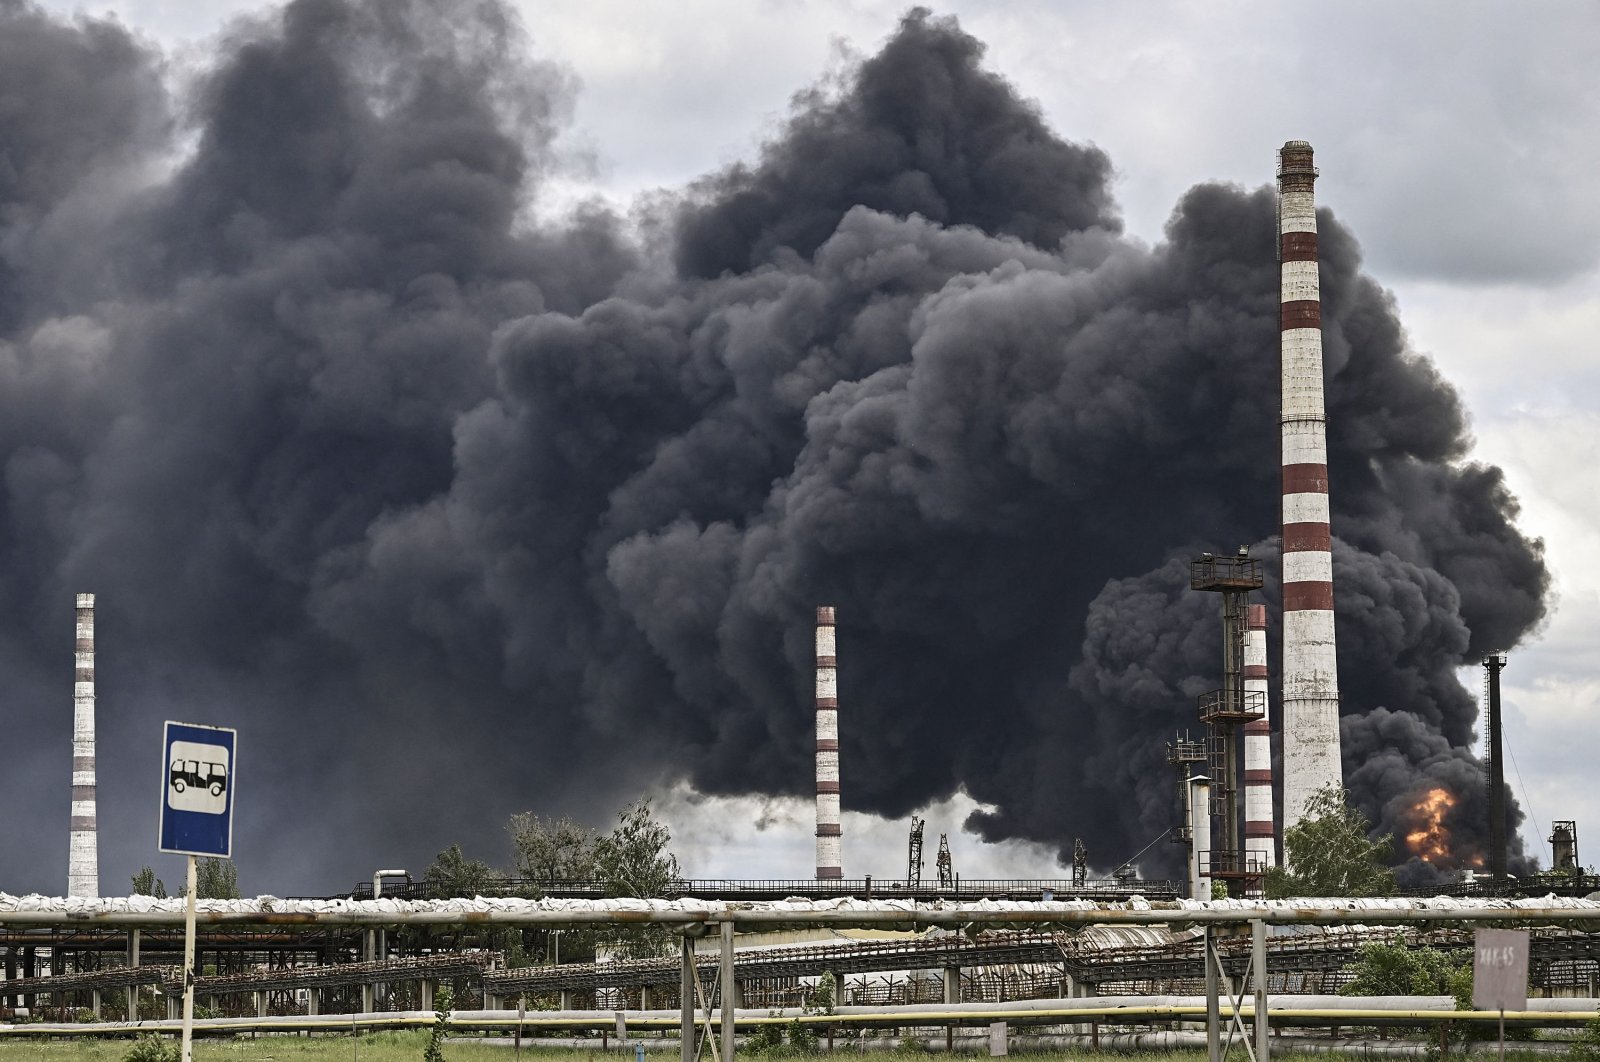 Smoke rises from an oil refinery after an attack outside the city of Lysychans in the eastern Donbass region, Ukraine, May 22, 2022. (AFP Photo)